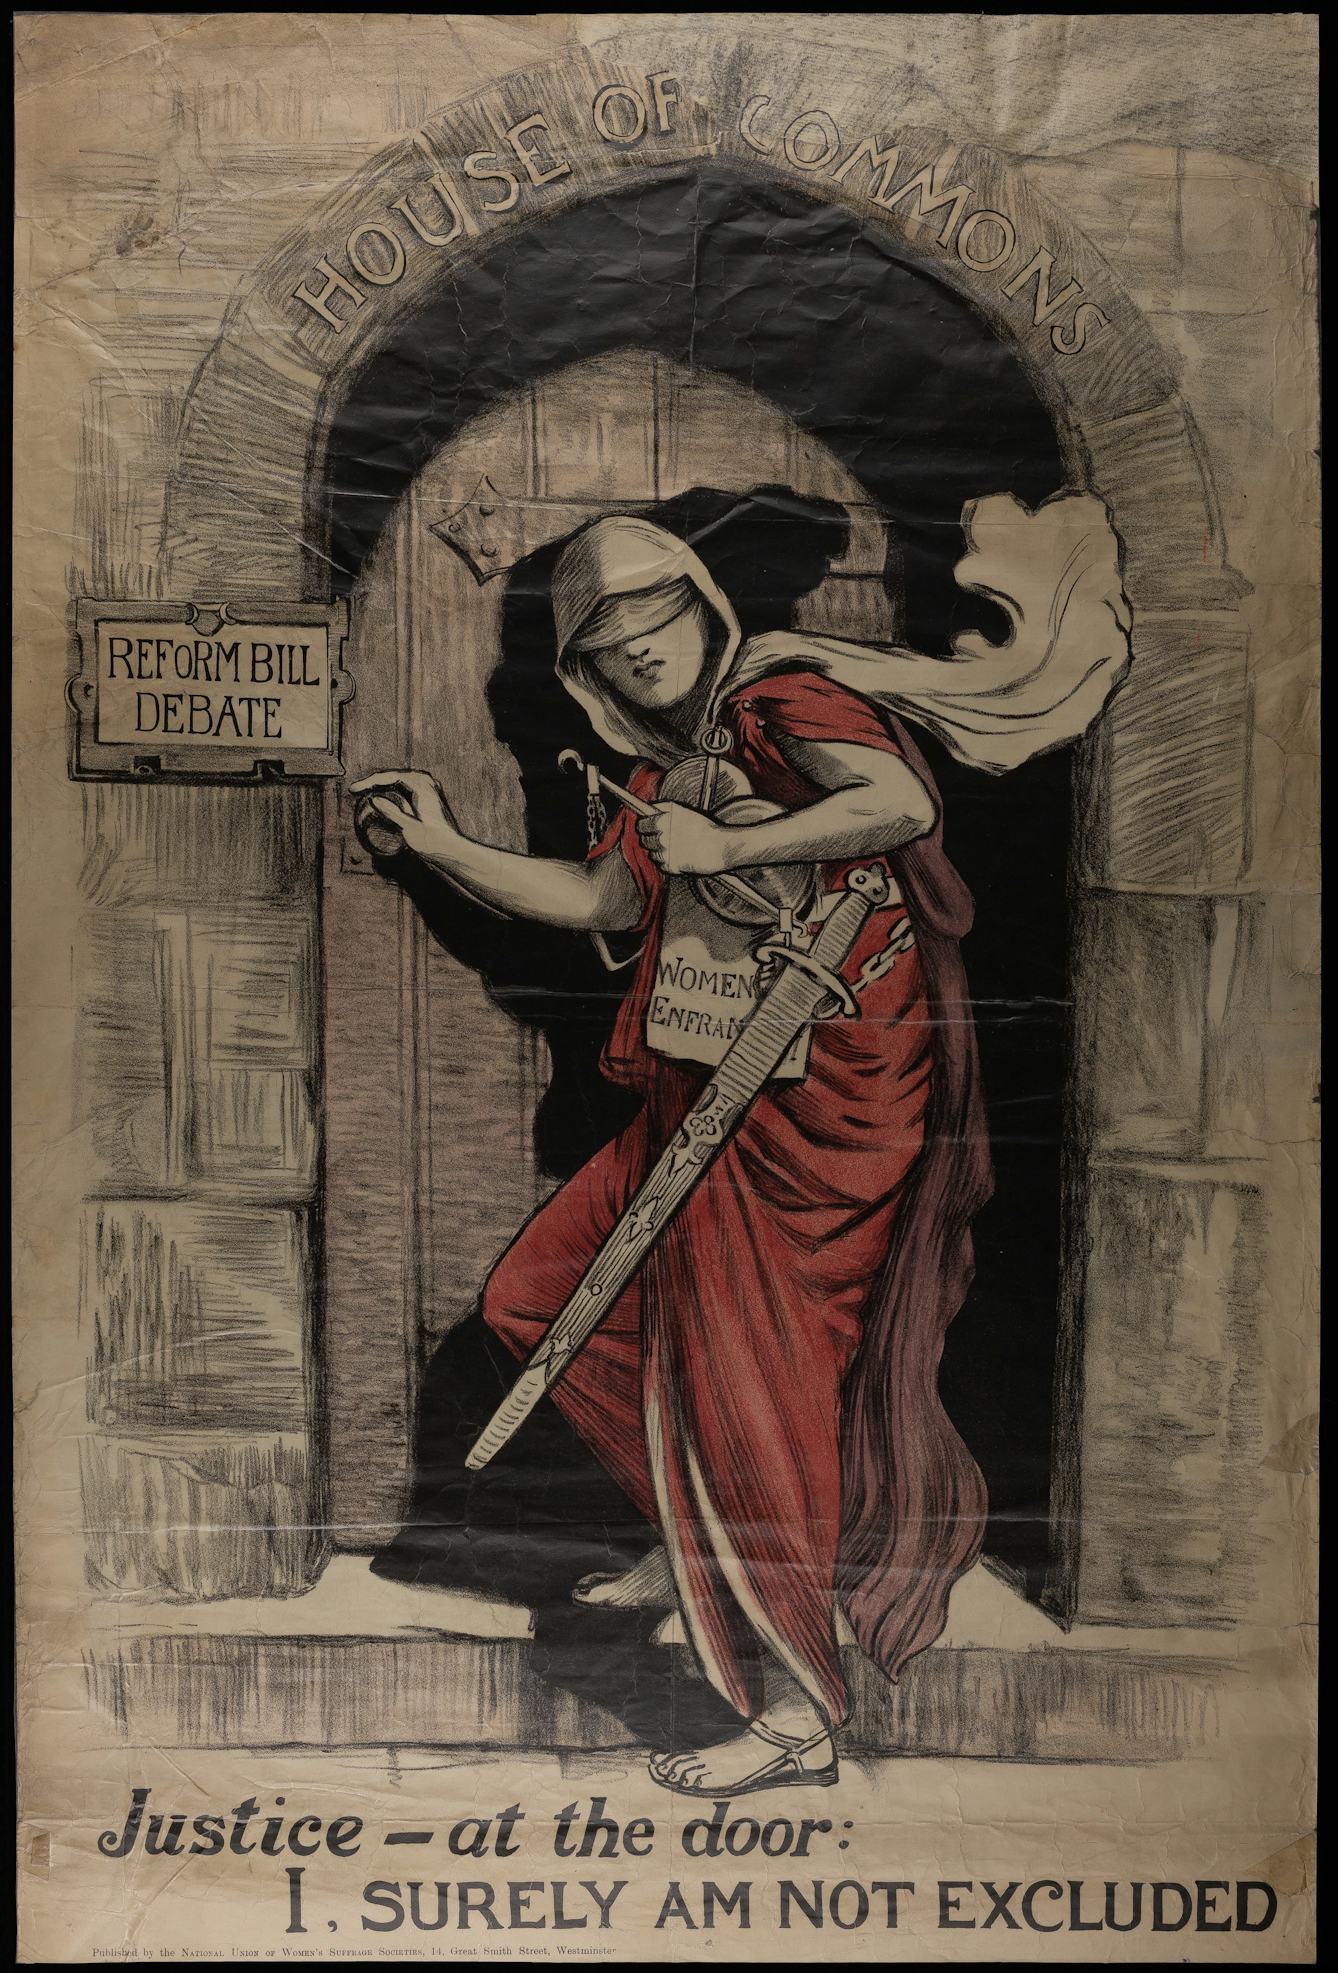 A sketch depicting a Lady Justice in a red robe with a sword by Mary Lowndes